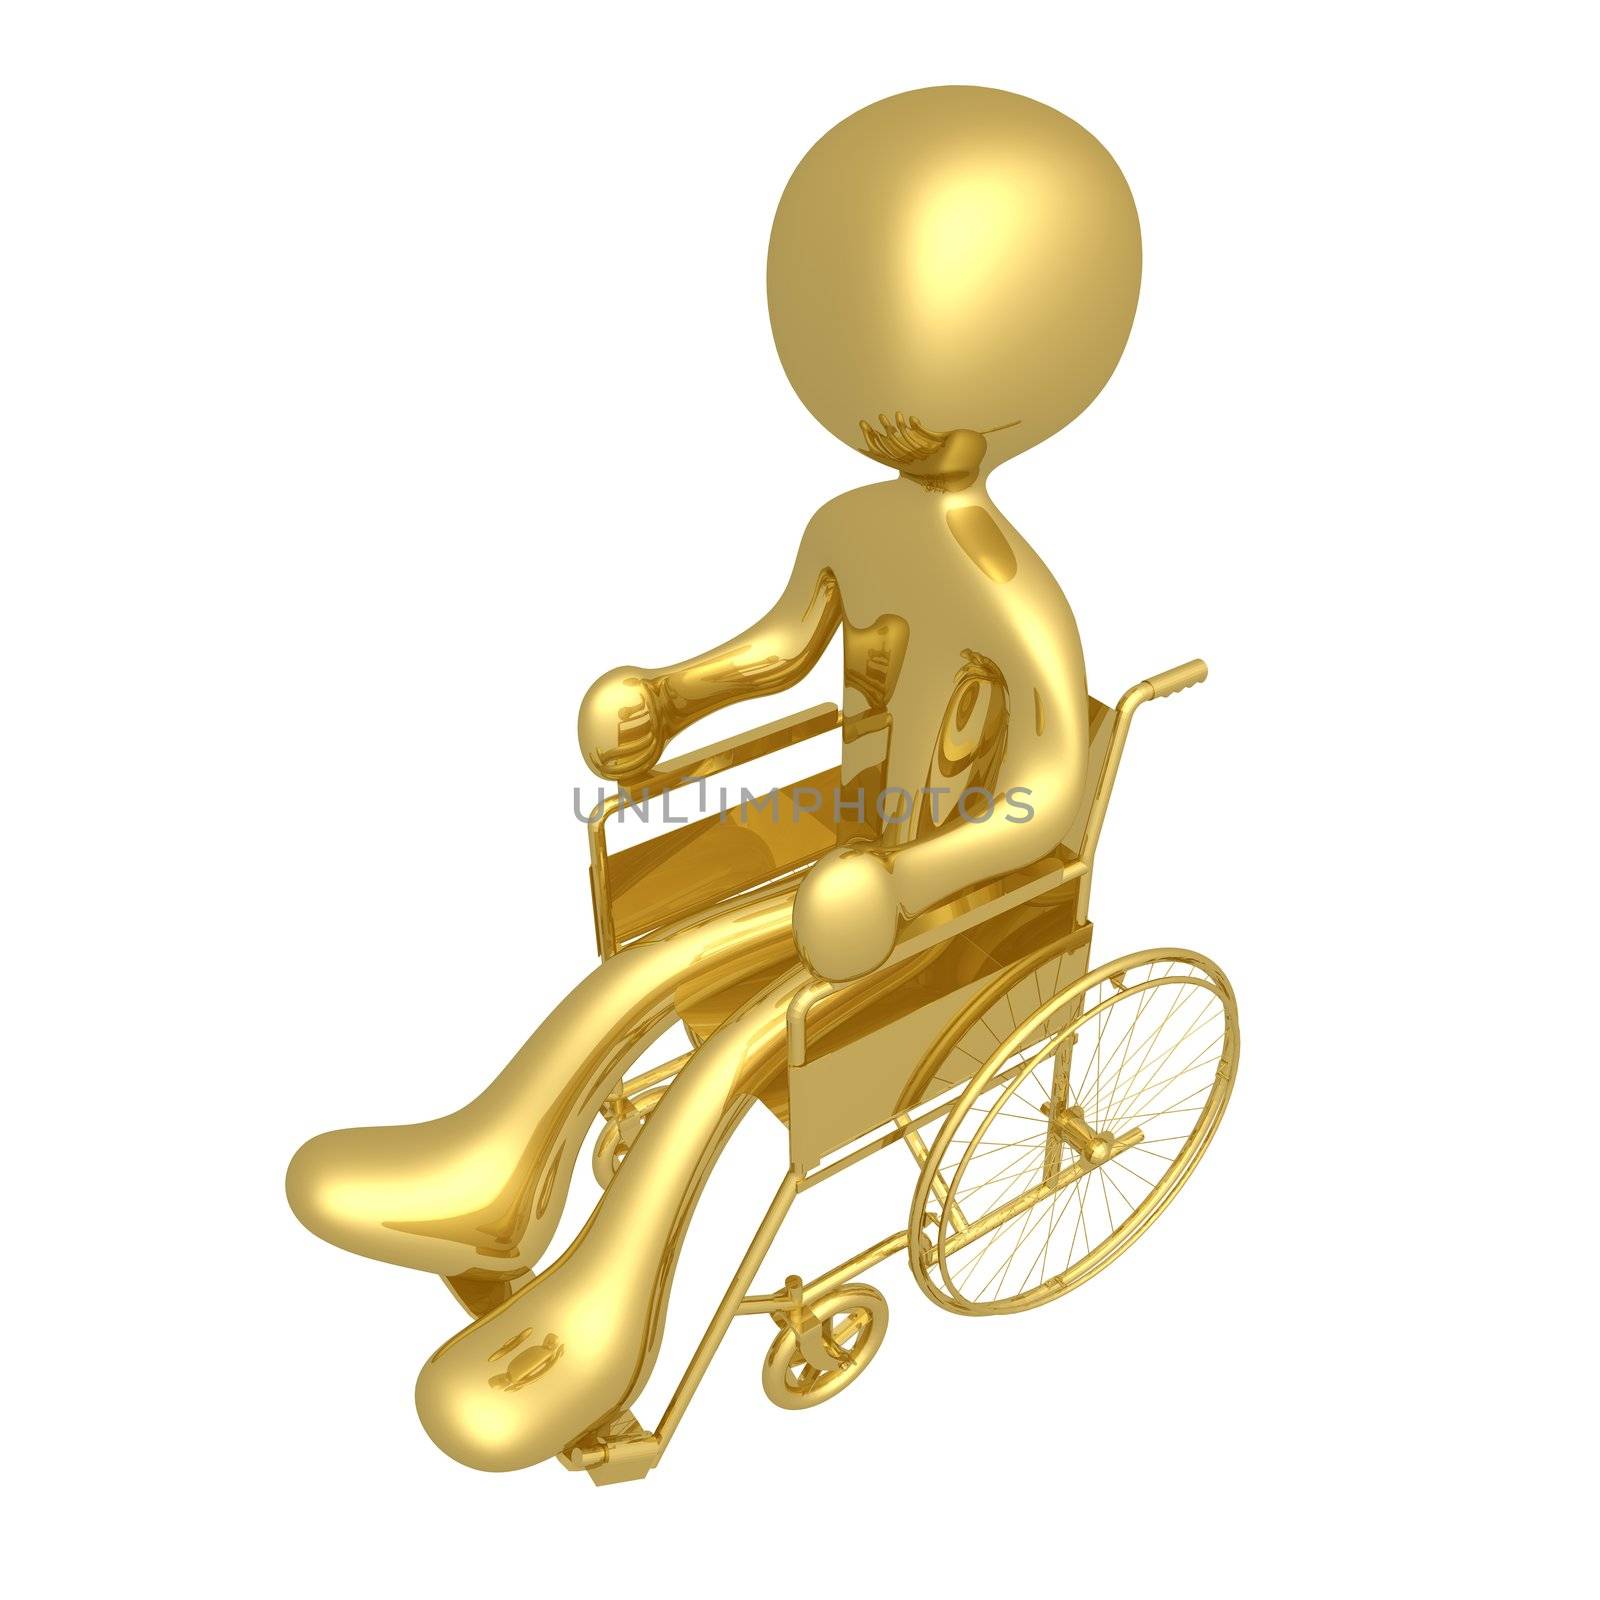 Computer generated 3d image - Wheelchair.